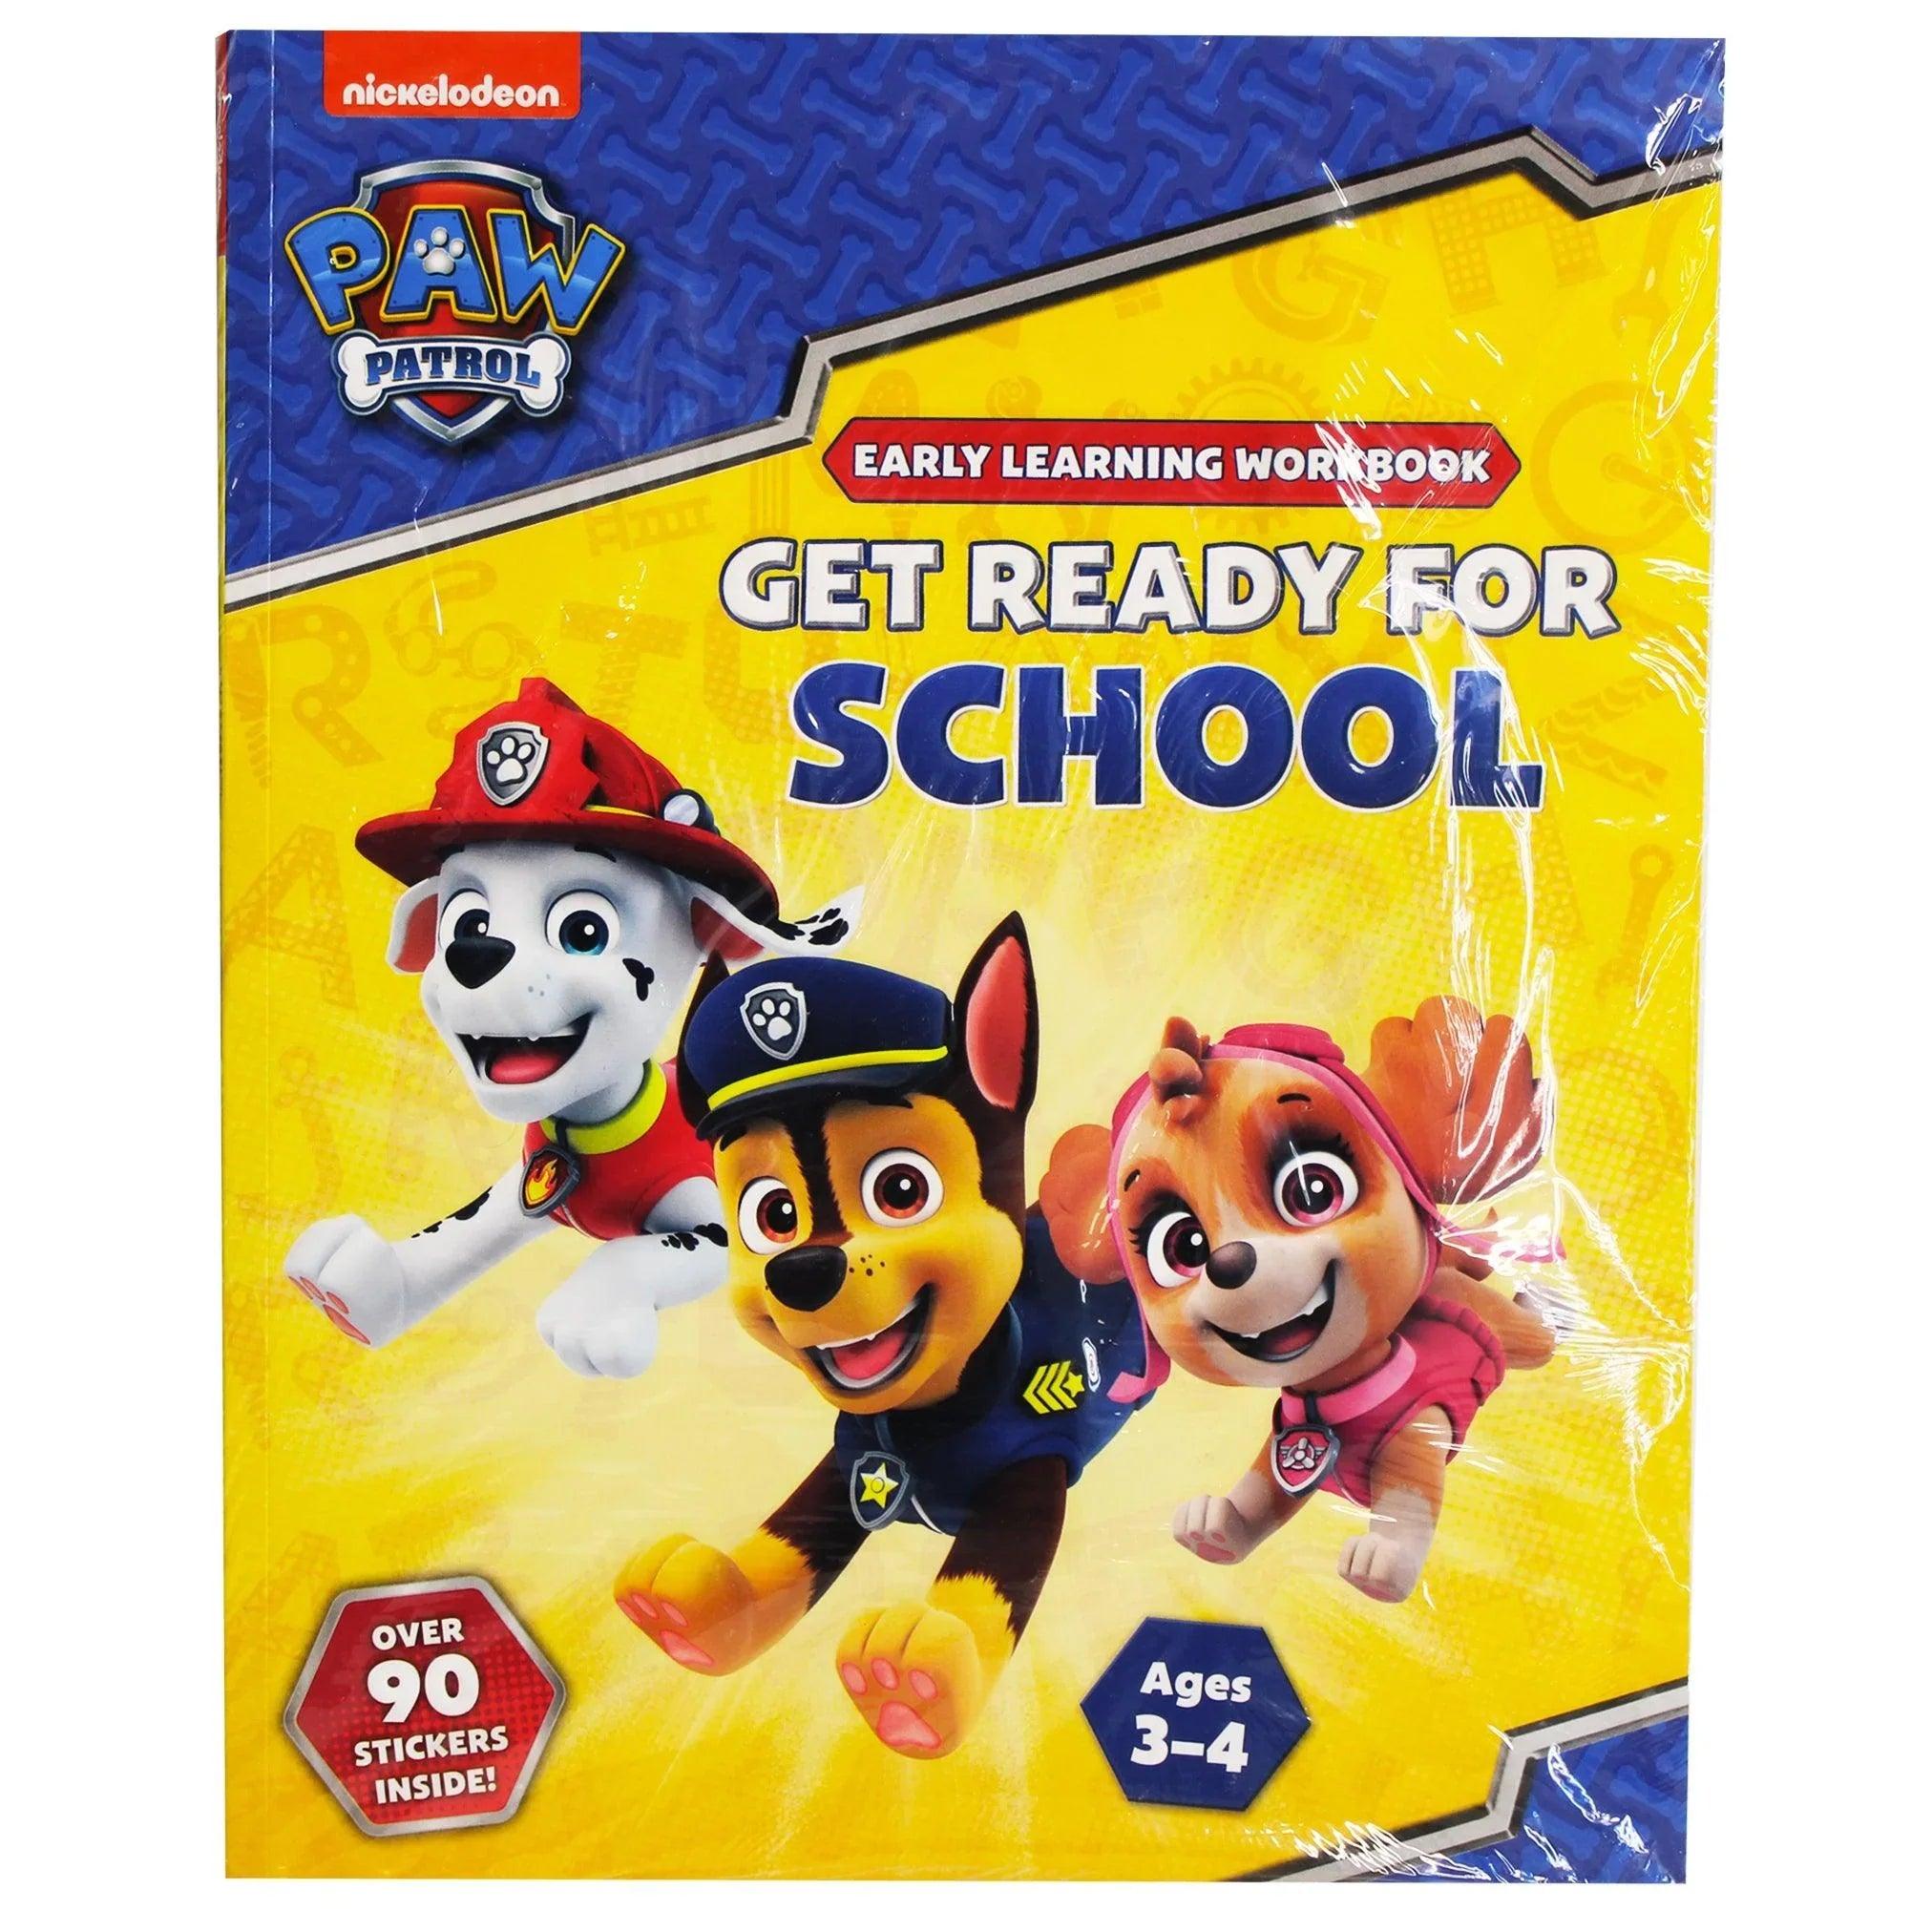 Paw Patrol - Get Ready For School Activity Book - Ourkids - OKO